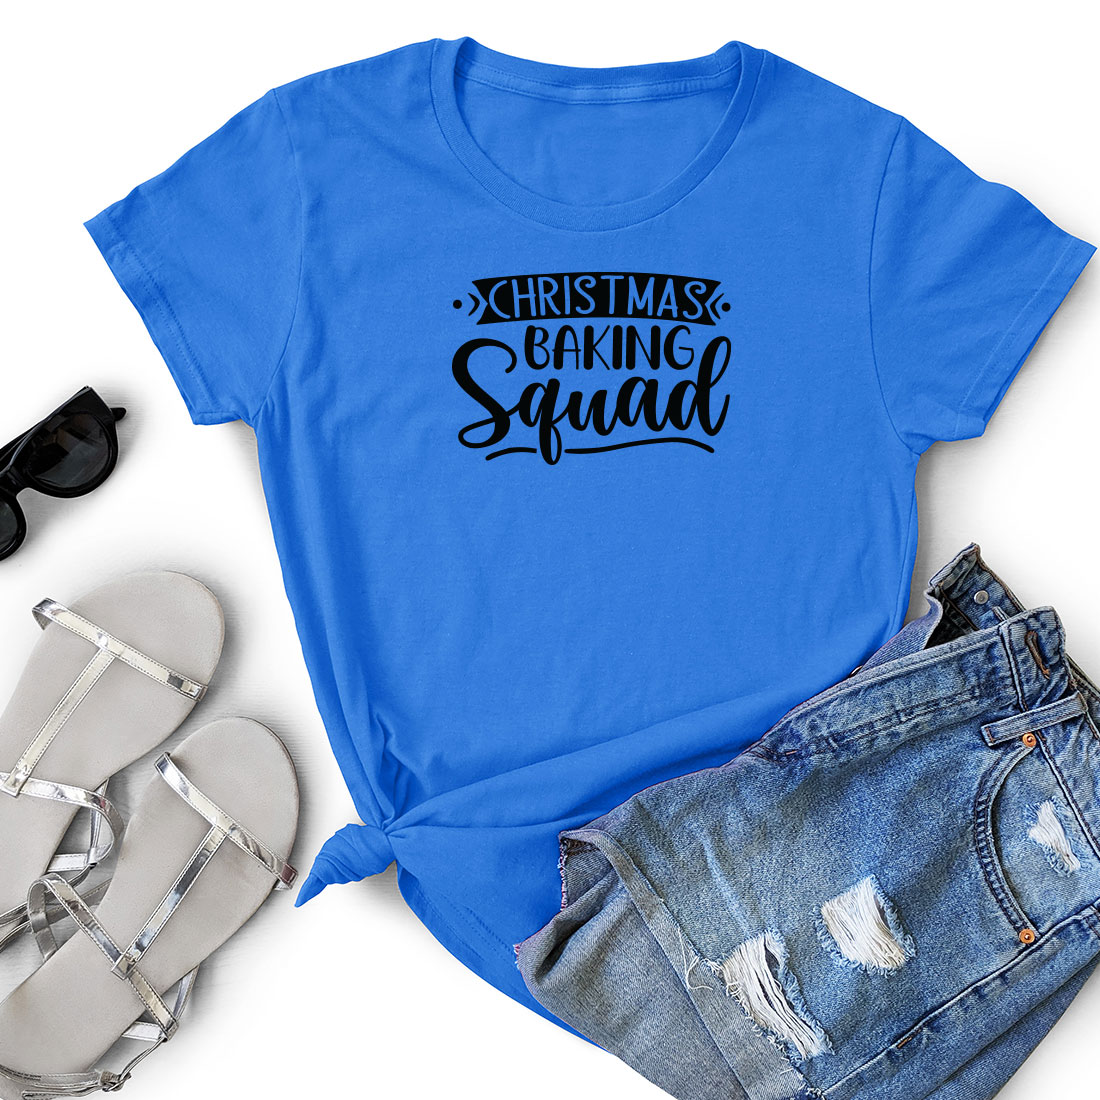 T - shirt that says christmas baking squad next to a pair of shorts.